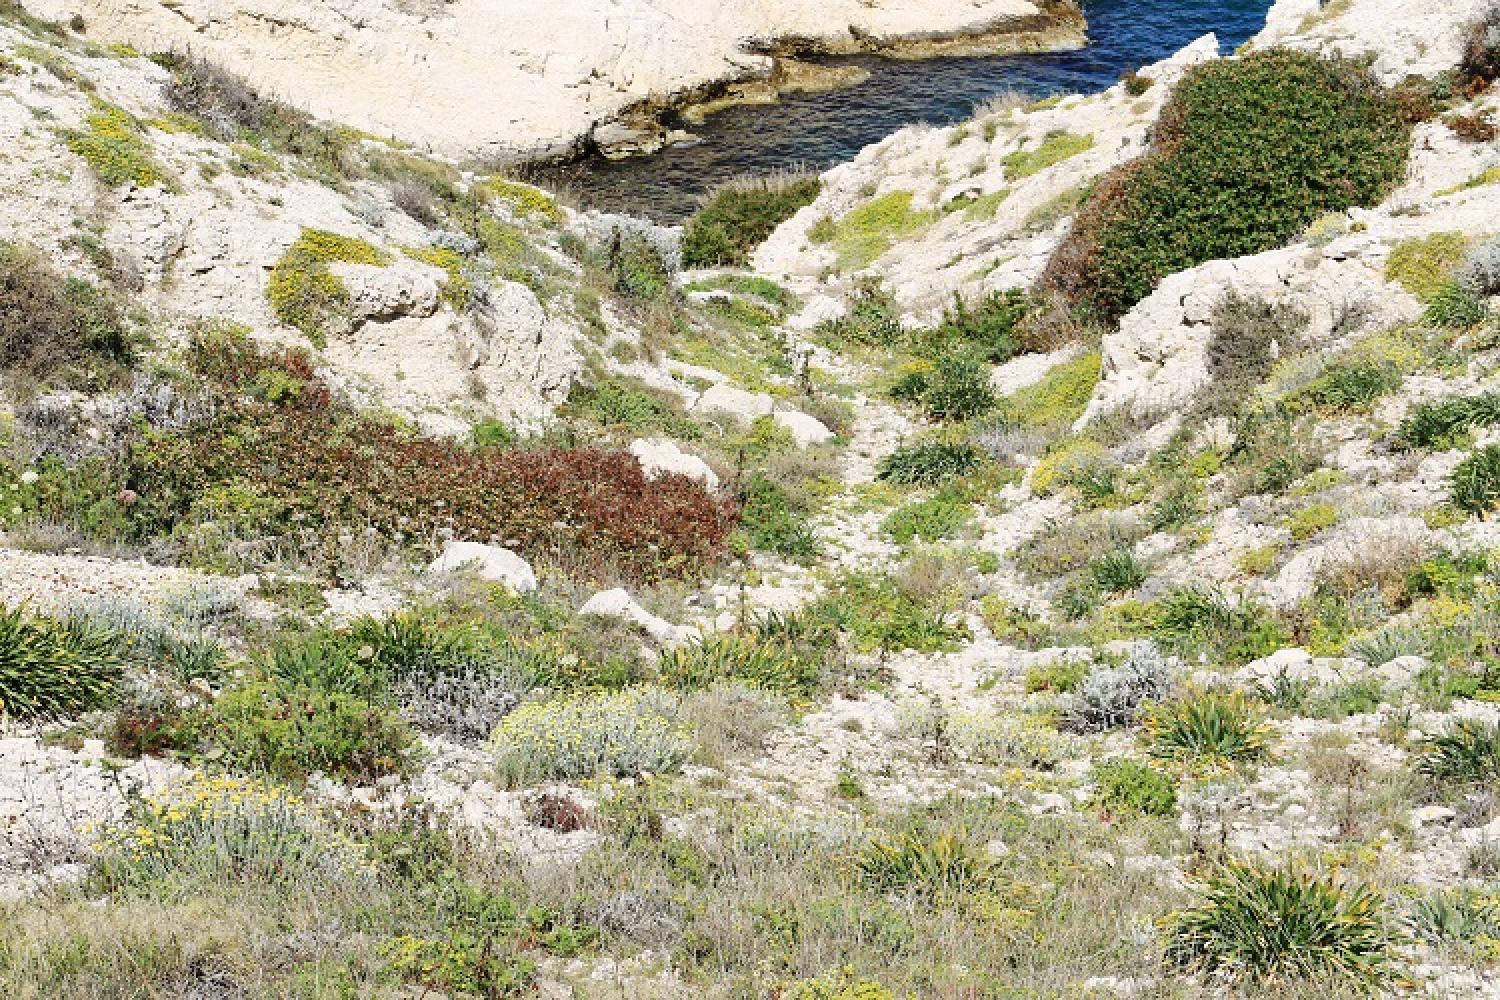 phryganes-calanques-marseille-cassis.jpg